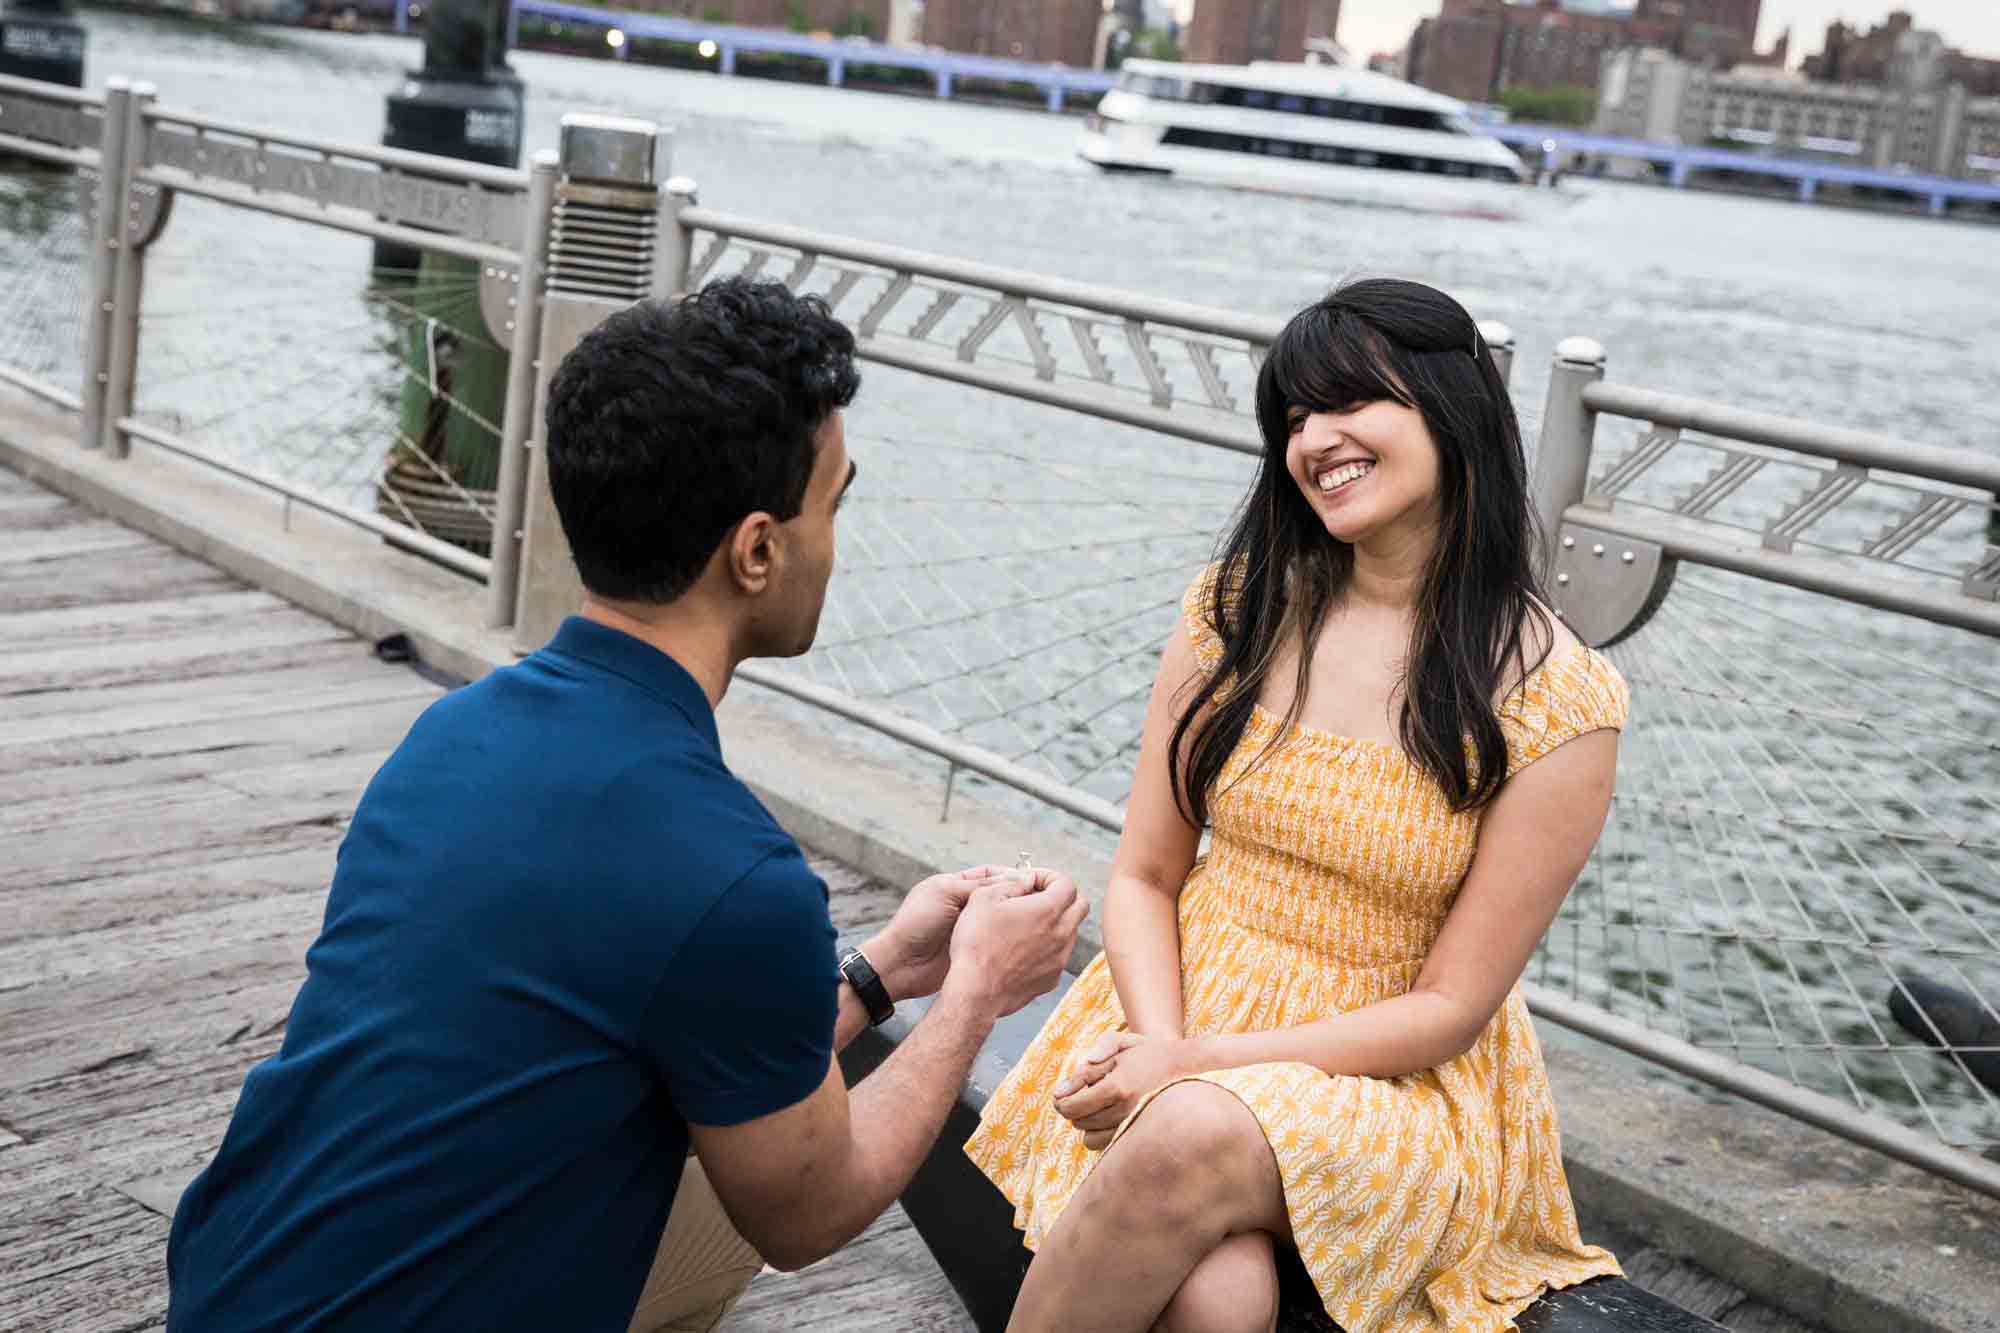 Man proposing to woman on a bench on a dock in Brooklyn Bridge Park